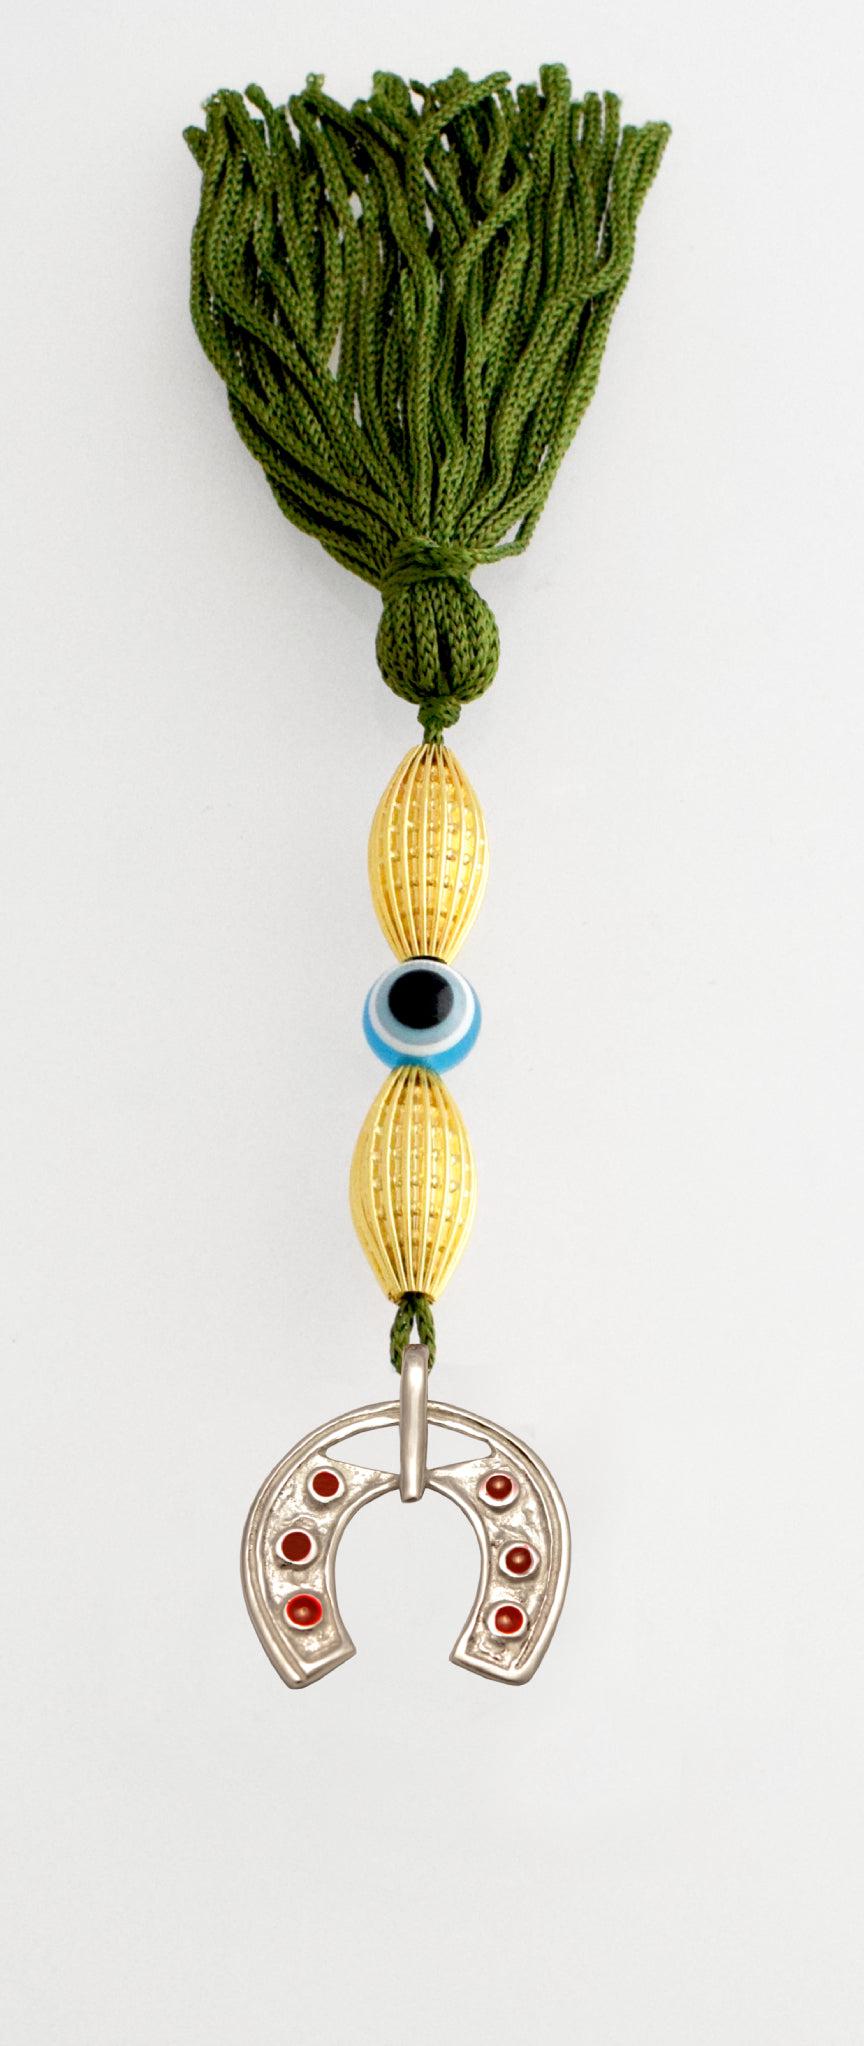 Evil Eye Charm on a tassel, House decoration, holiday decor, welcome gift, silver charm, Lucky petal Charm